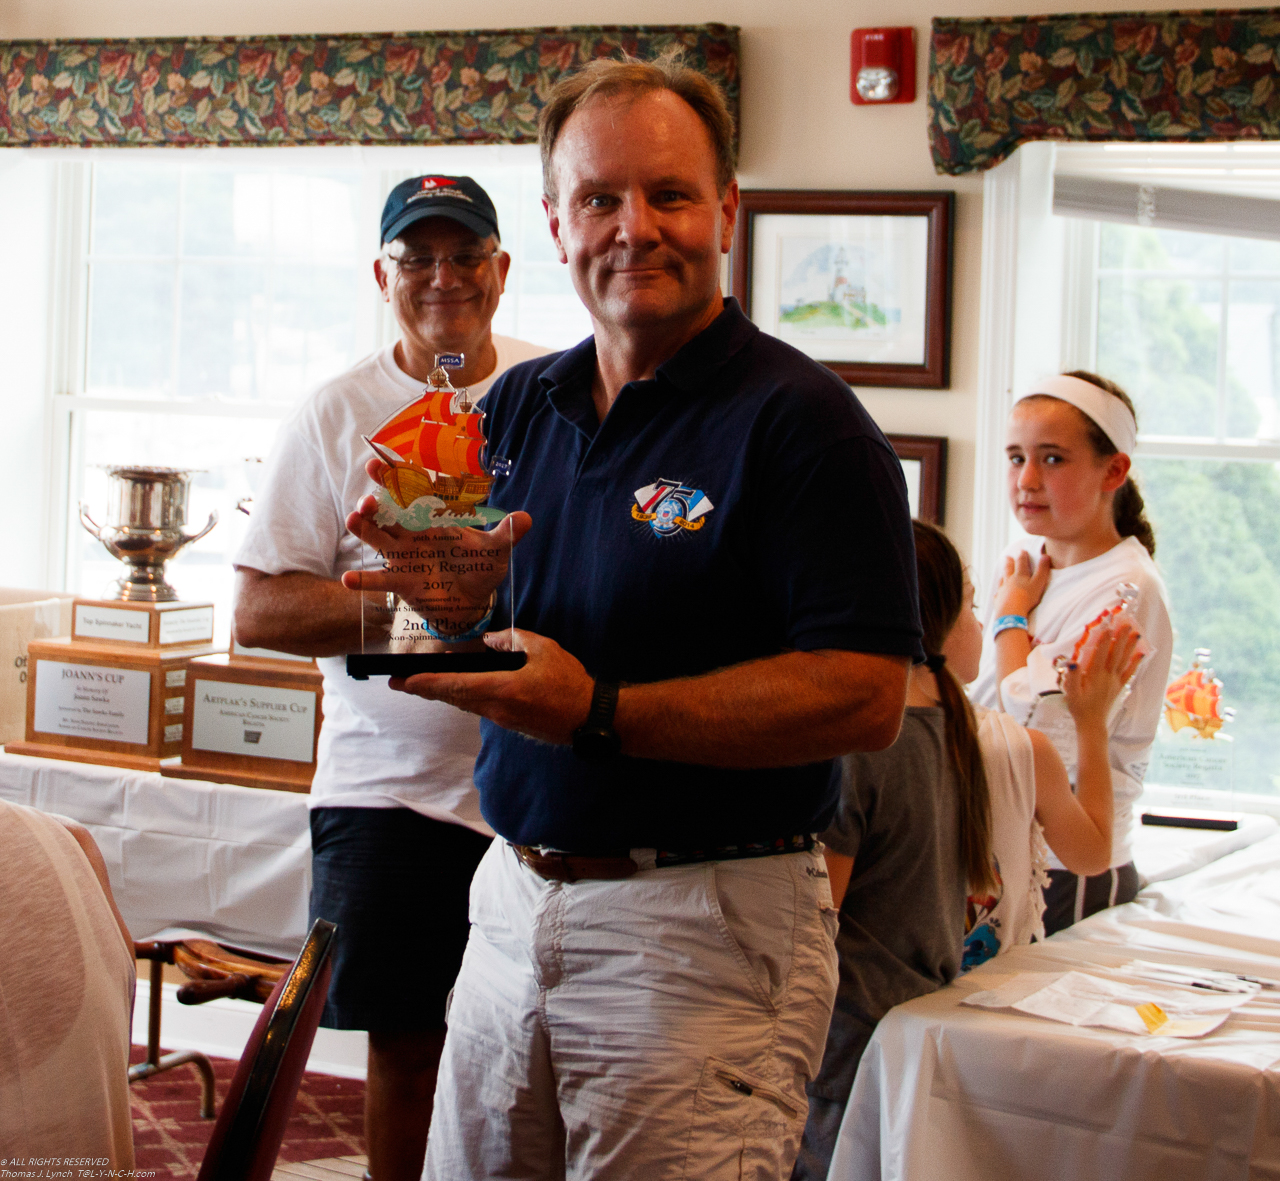 36th Annual MSSA America Cancer Society Regatta  ~~  Akula won 2nd place and missed 1st by 37 seconds